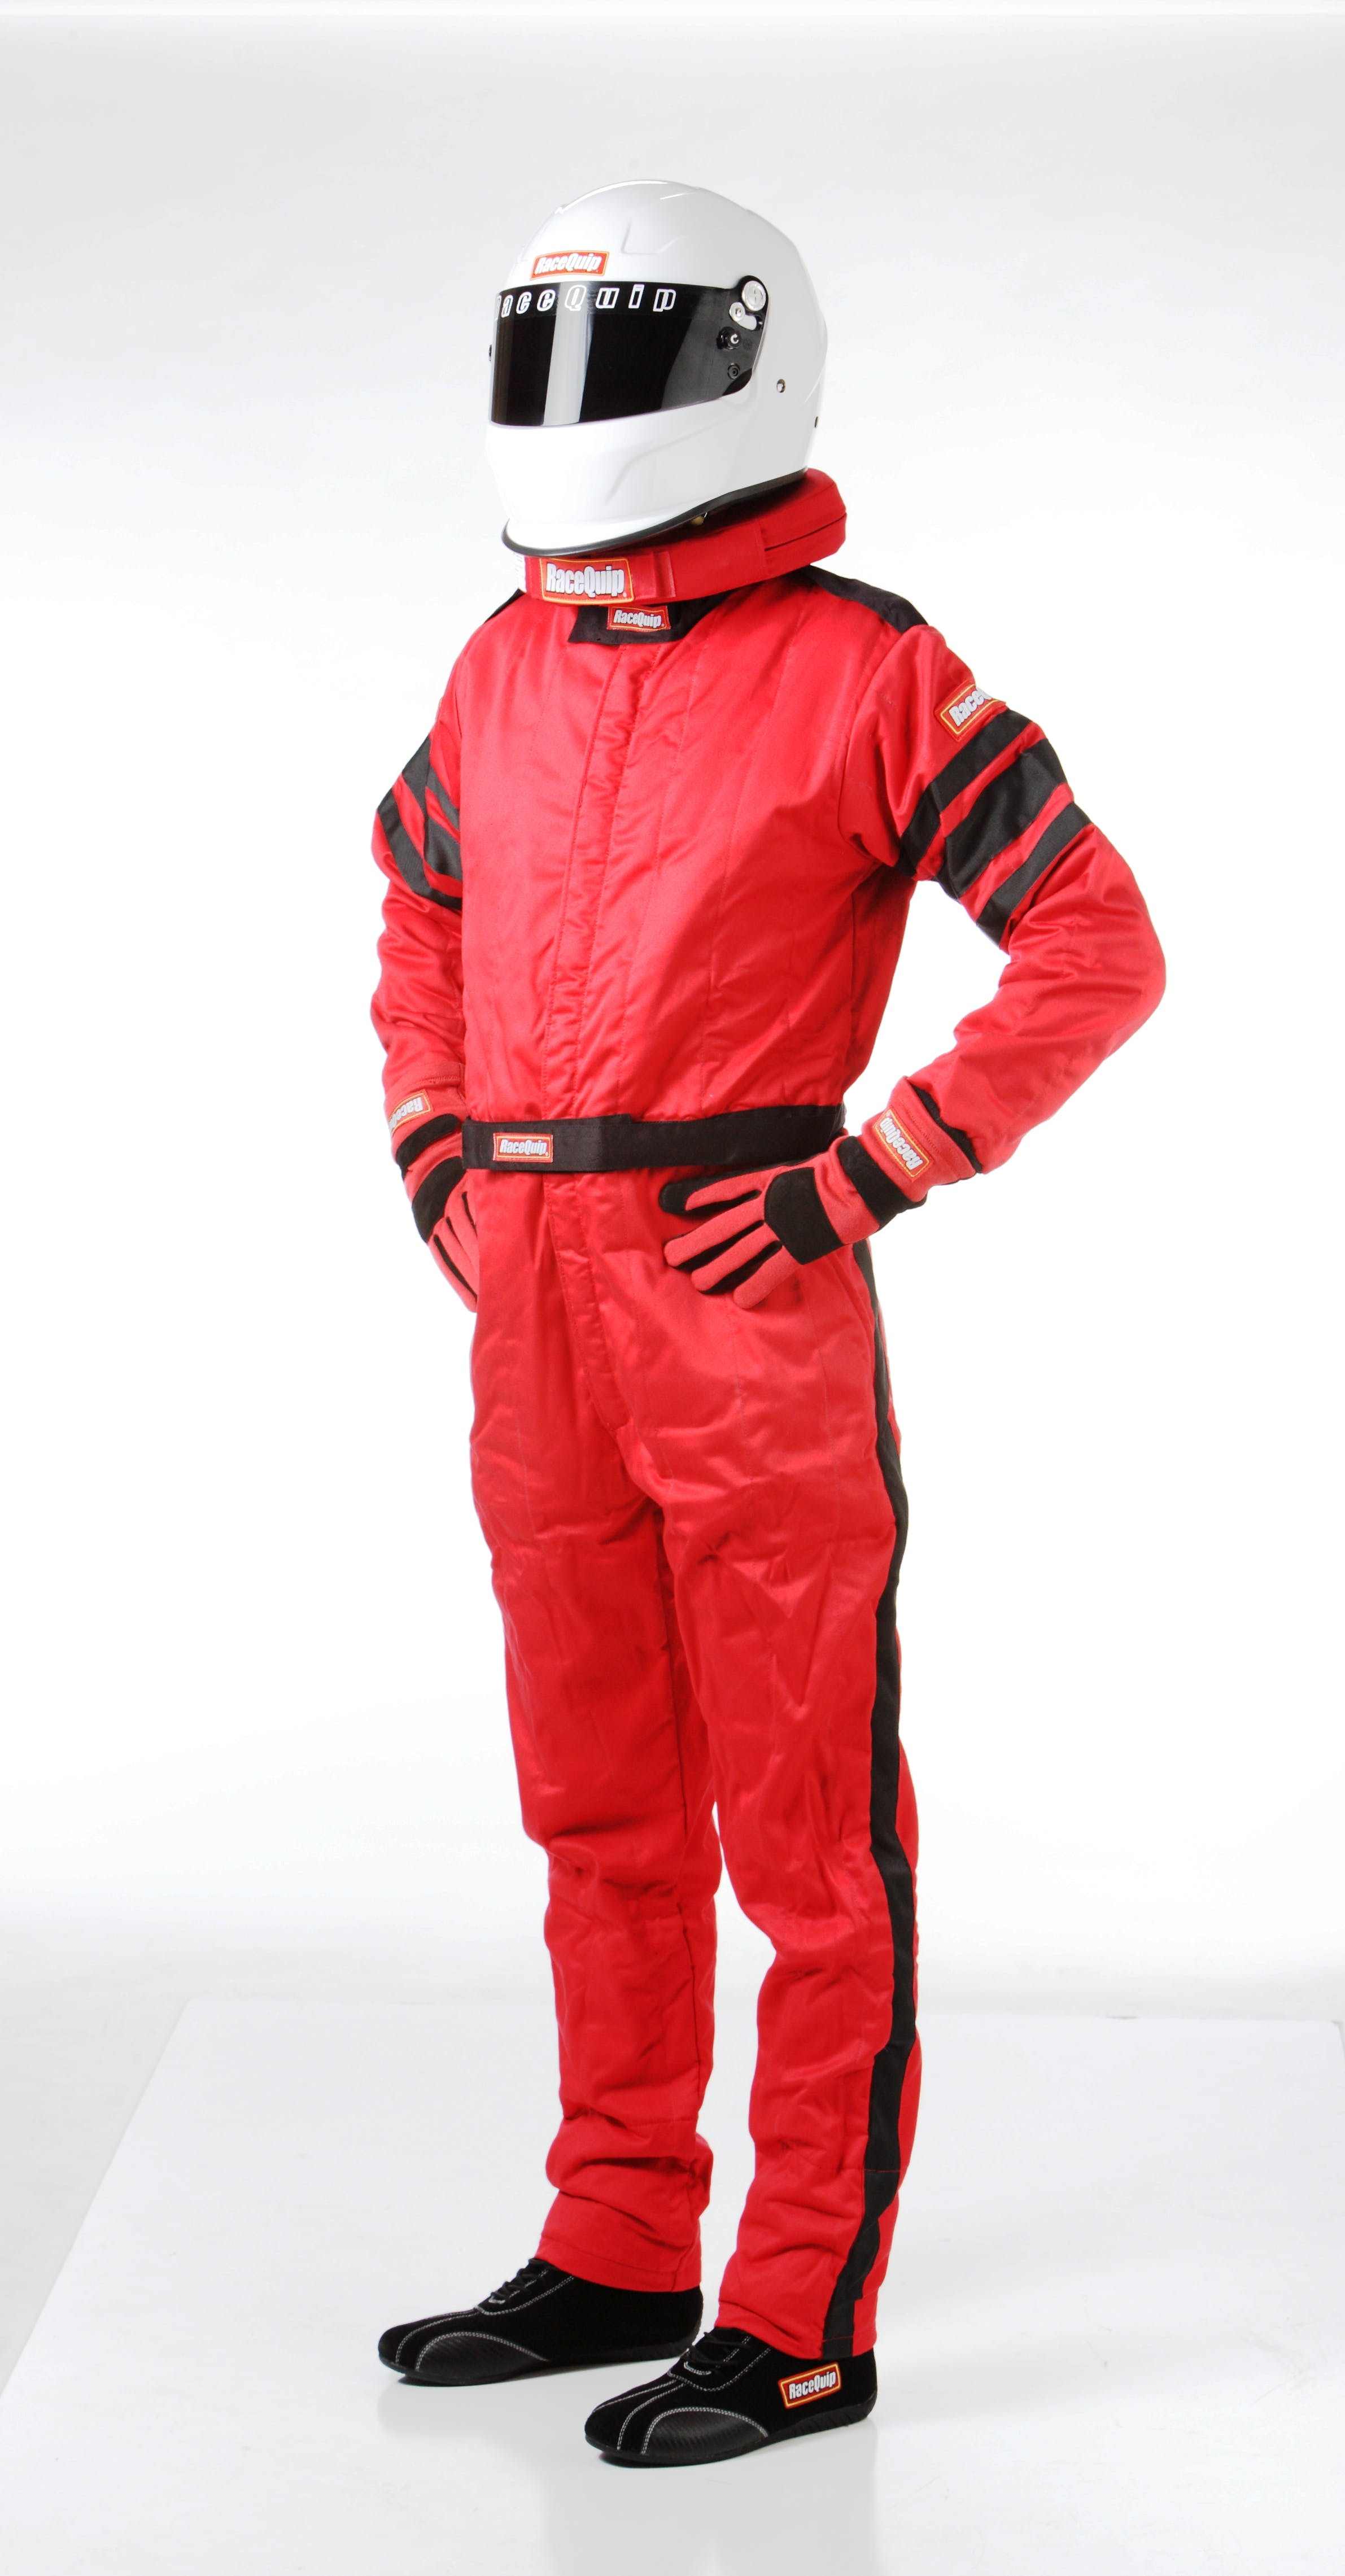 RaceQuip 120016 SFI-5 Pyrovatex One-Piece Multi-Layer Racing Fire Suit (Red, X-Large)